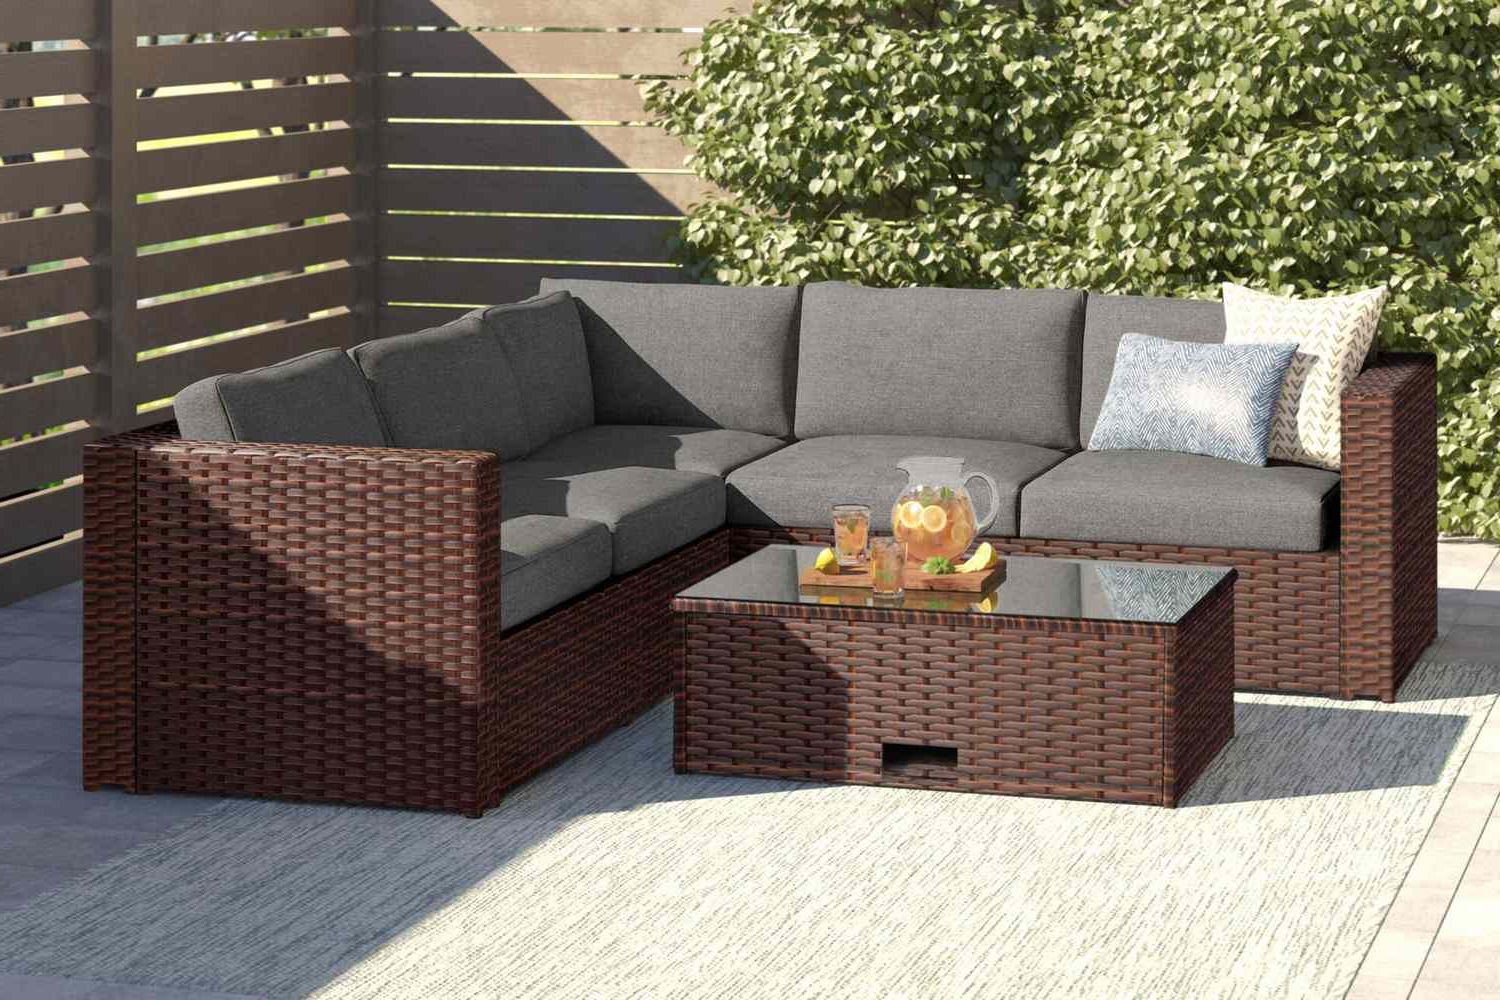 [%wayfair's Way Day Sale Has Patio Furniture For Up To 76% Off Regarding Preferred All Weather Wicker Sectional Seating Group|all Weather Wicker Sectional Seating Group Intended For Well Known Wayfair's Way Day Sale Has Patio Furniture For Up To 76% Off|latest All Weather Wicker Sectional Seating Group Regarding Wayfair's Way Day Sale Has Patio Furniture For Up To 76% Off|famous Wayfair's Way Day Sale Has Patio Furniture For Up To 76% Off With Regard To All Weather Wicker Sectional Seating Group%] (View 15 of 15)